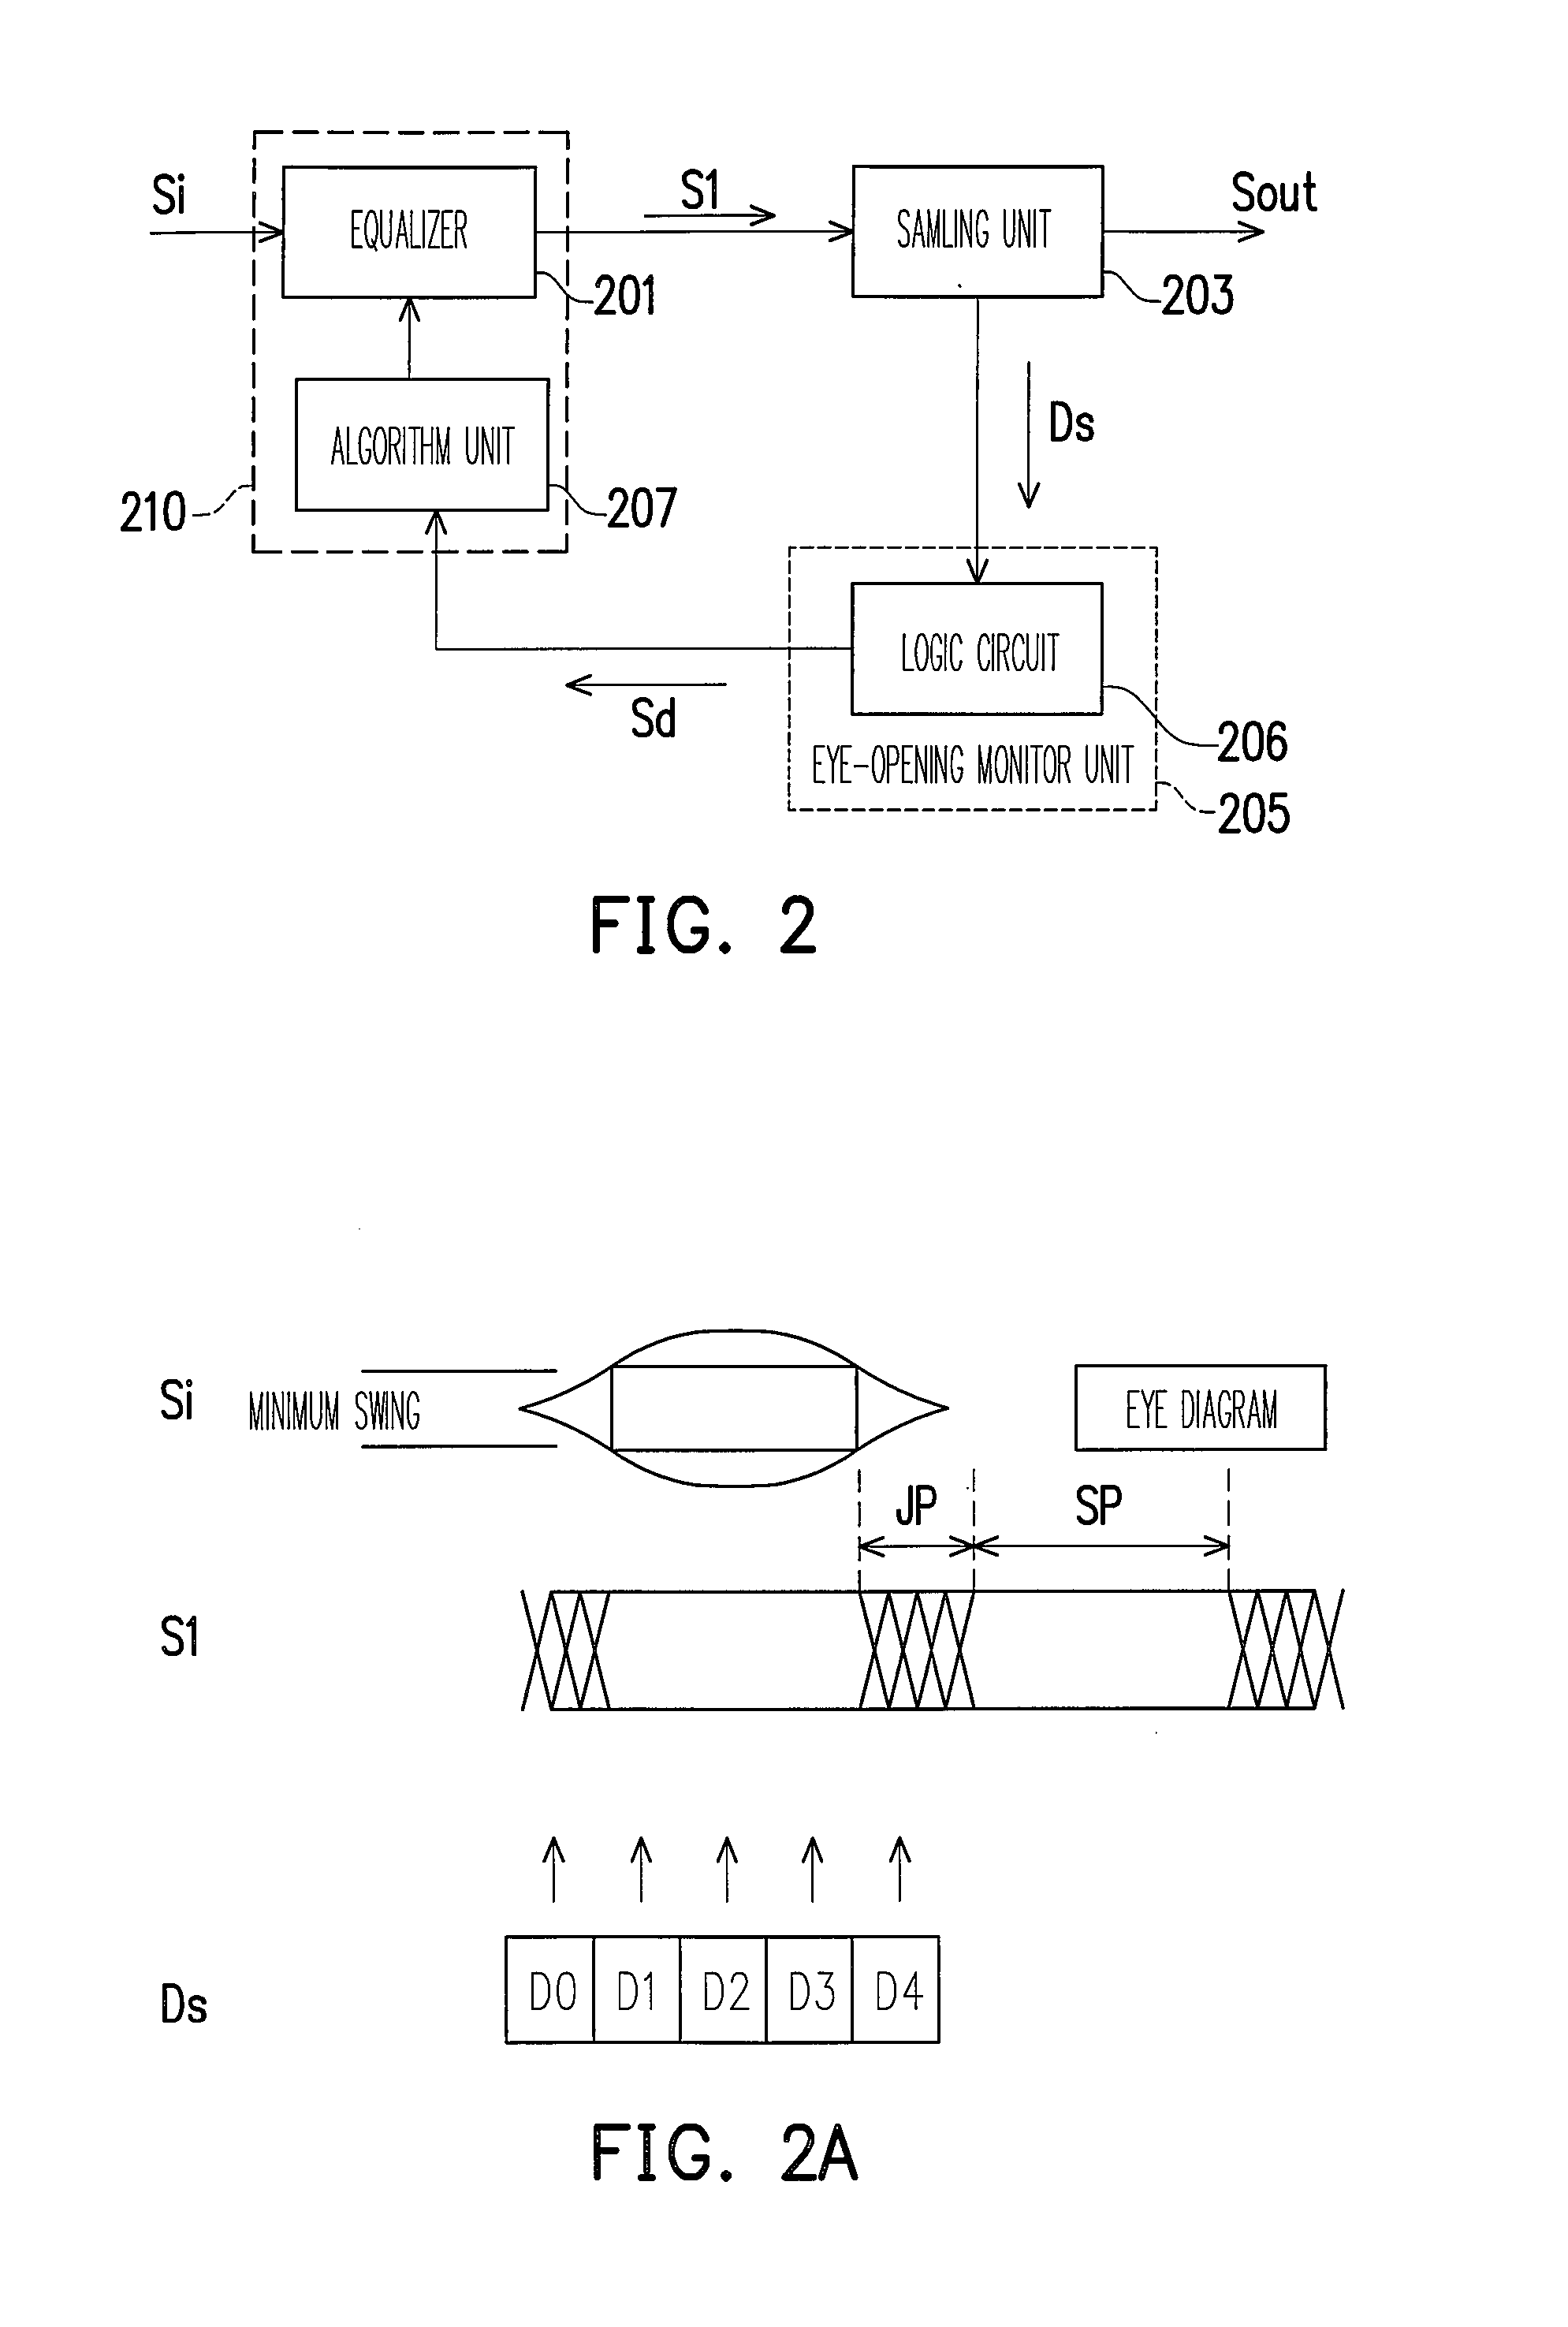 Adaptive equalizer apparatus with digital eye-opening monitor unit and method thereof